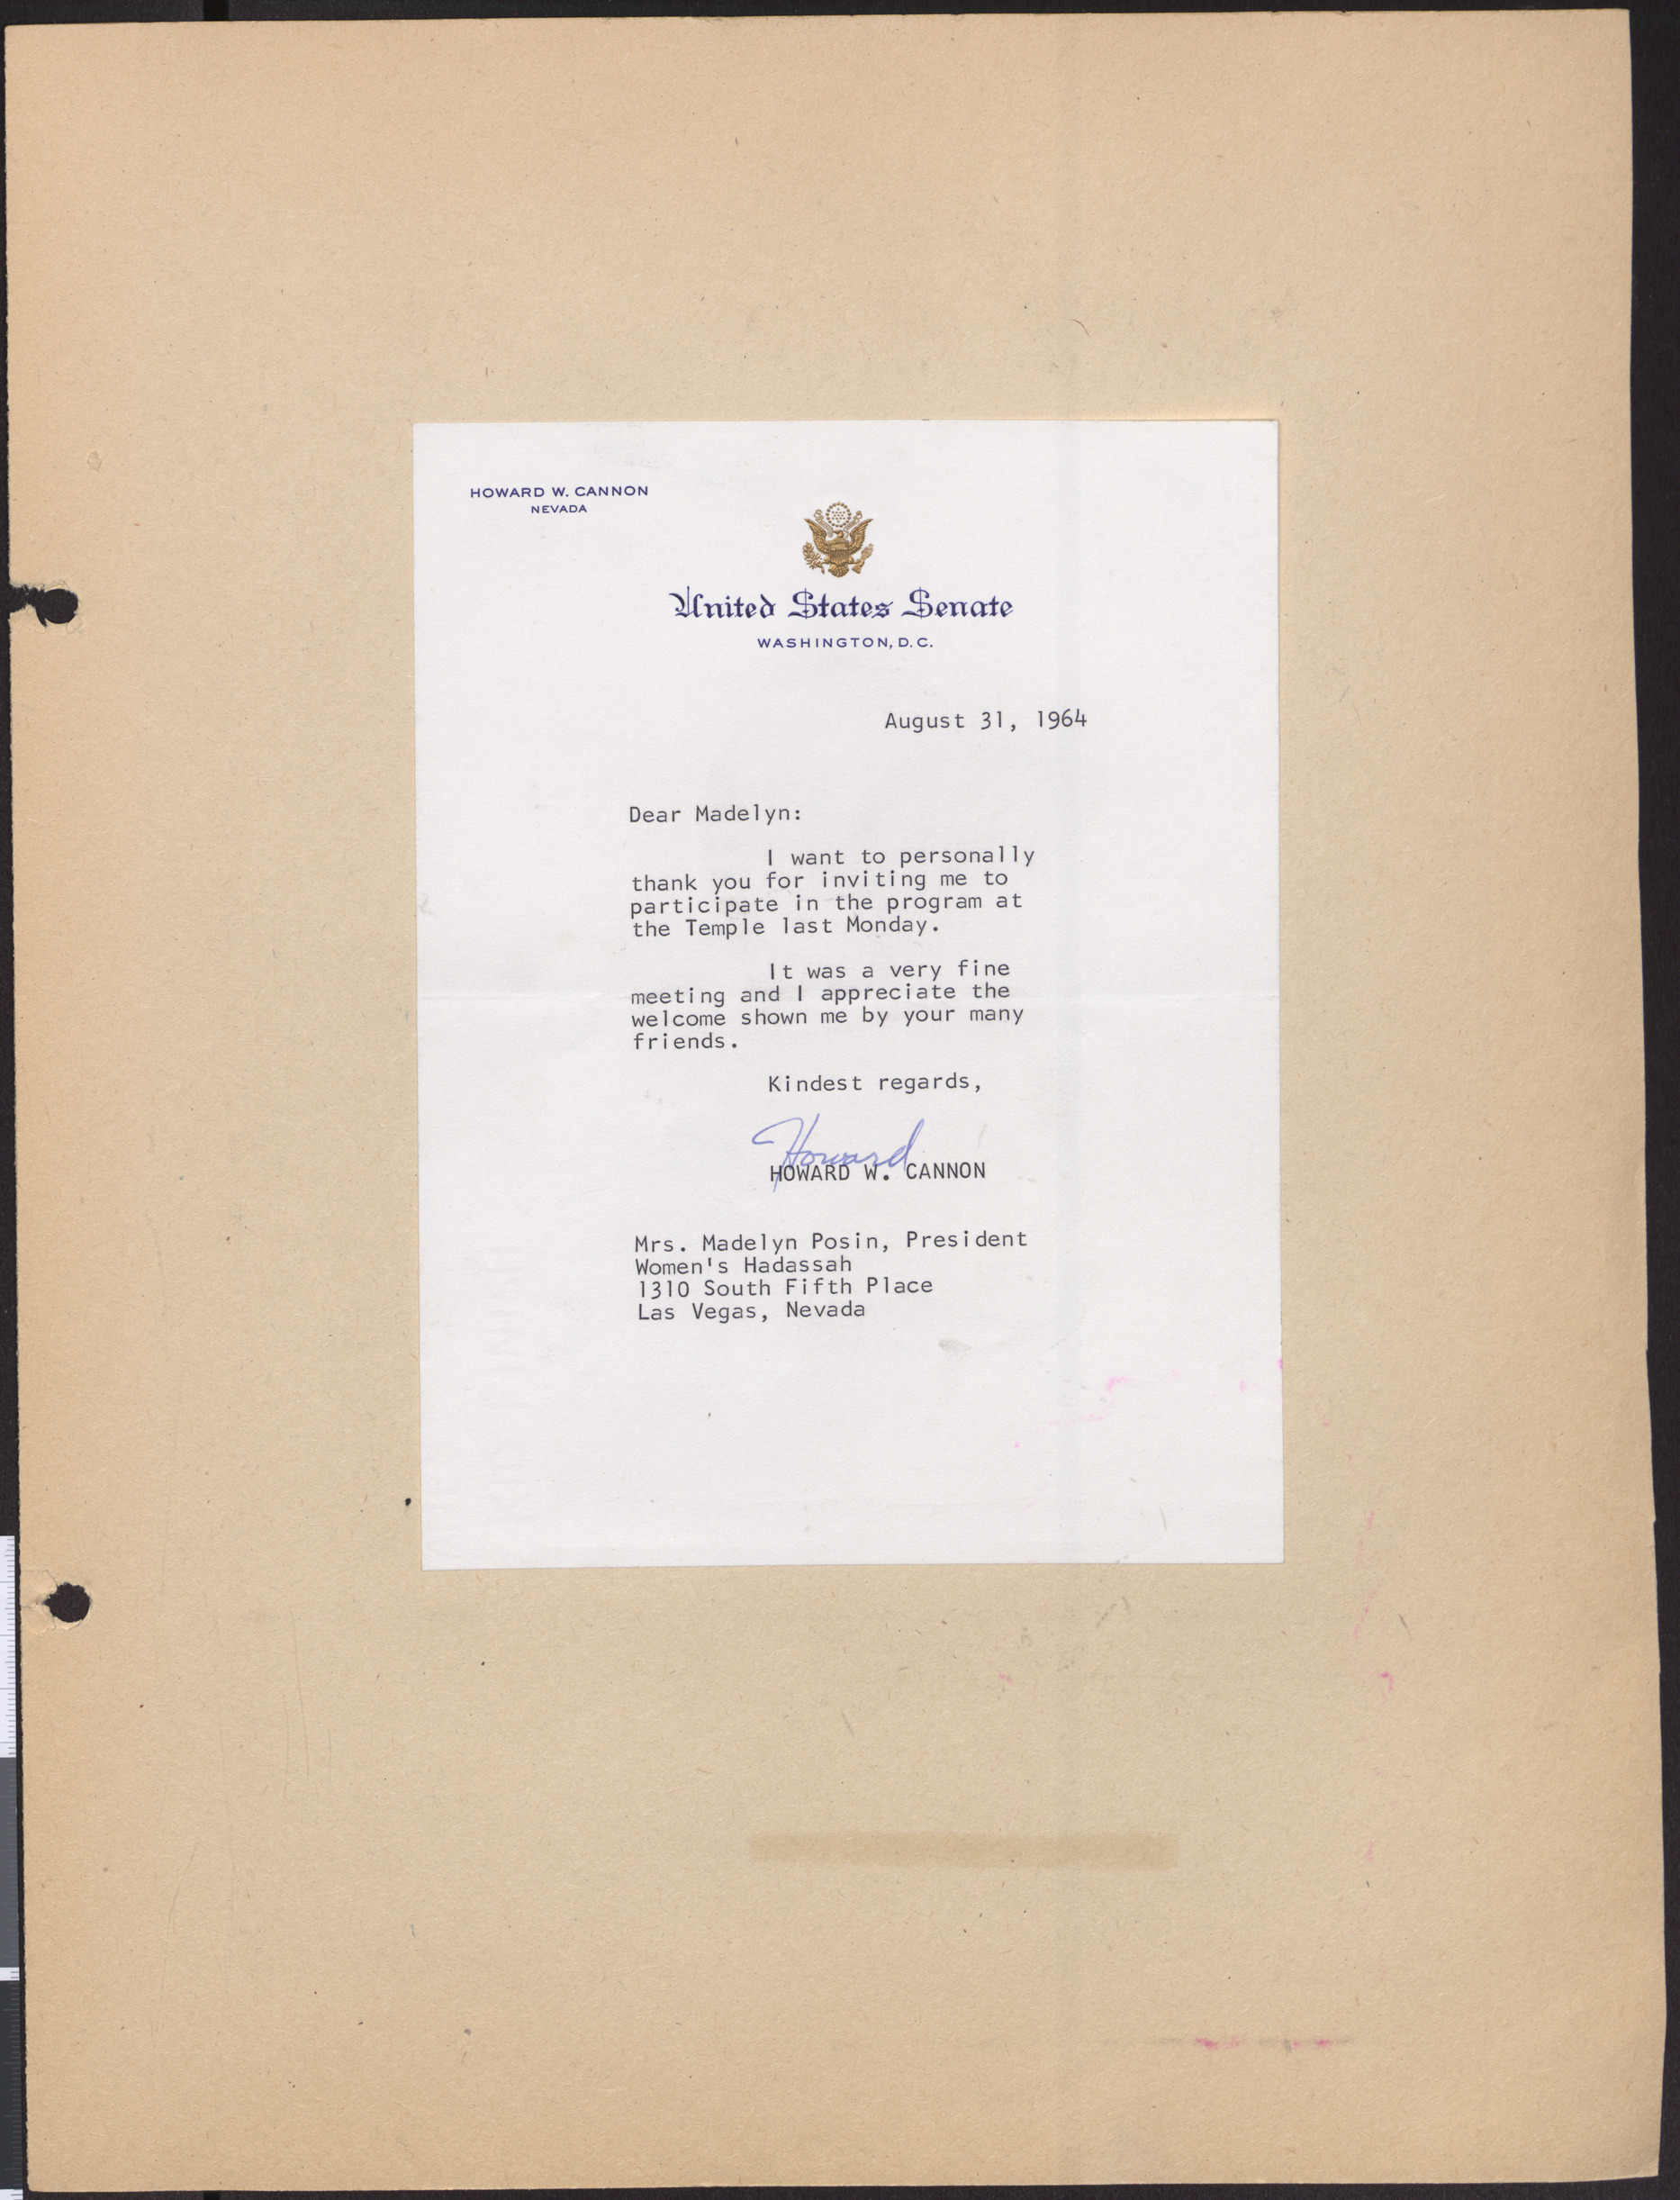 Letter from Howard W. Cannon (Washington, D.C.) to Madelyn Posin (Las Vegas, Nev.), August 31, 1964